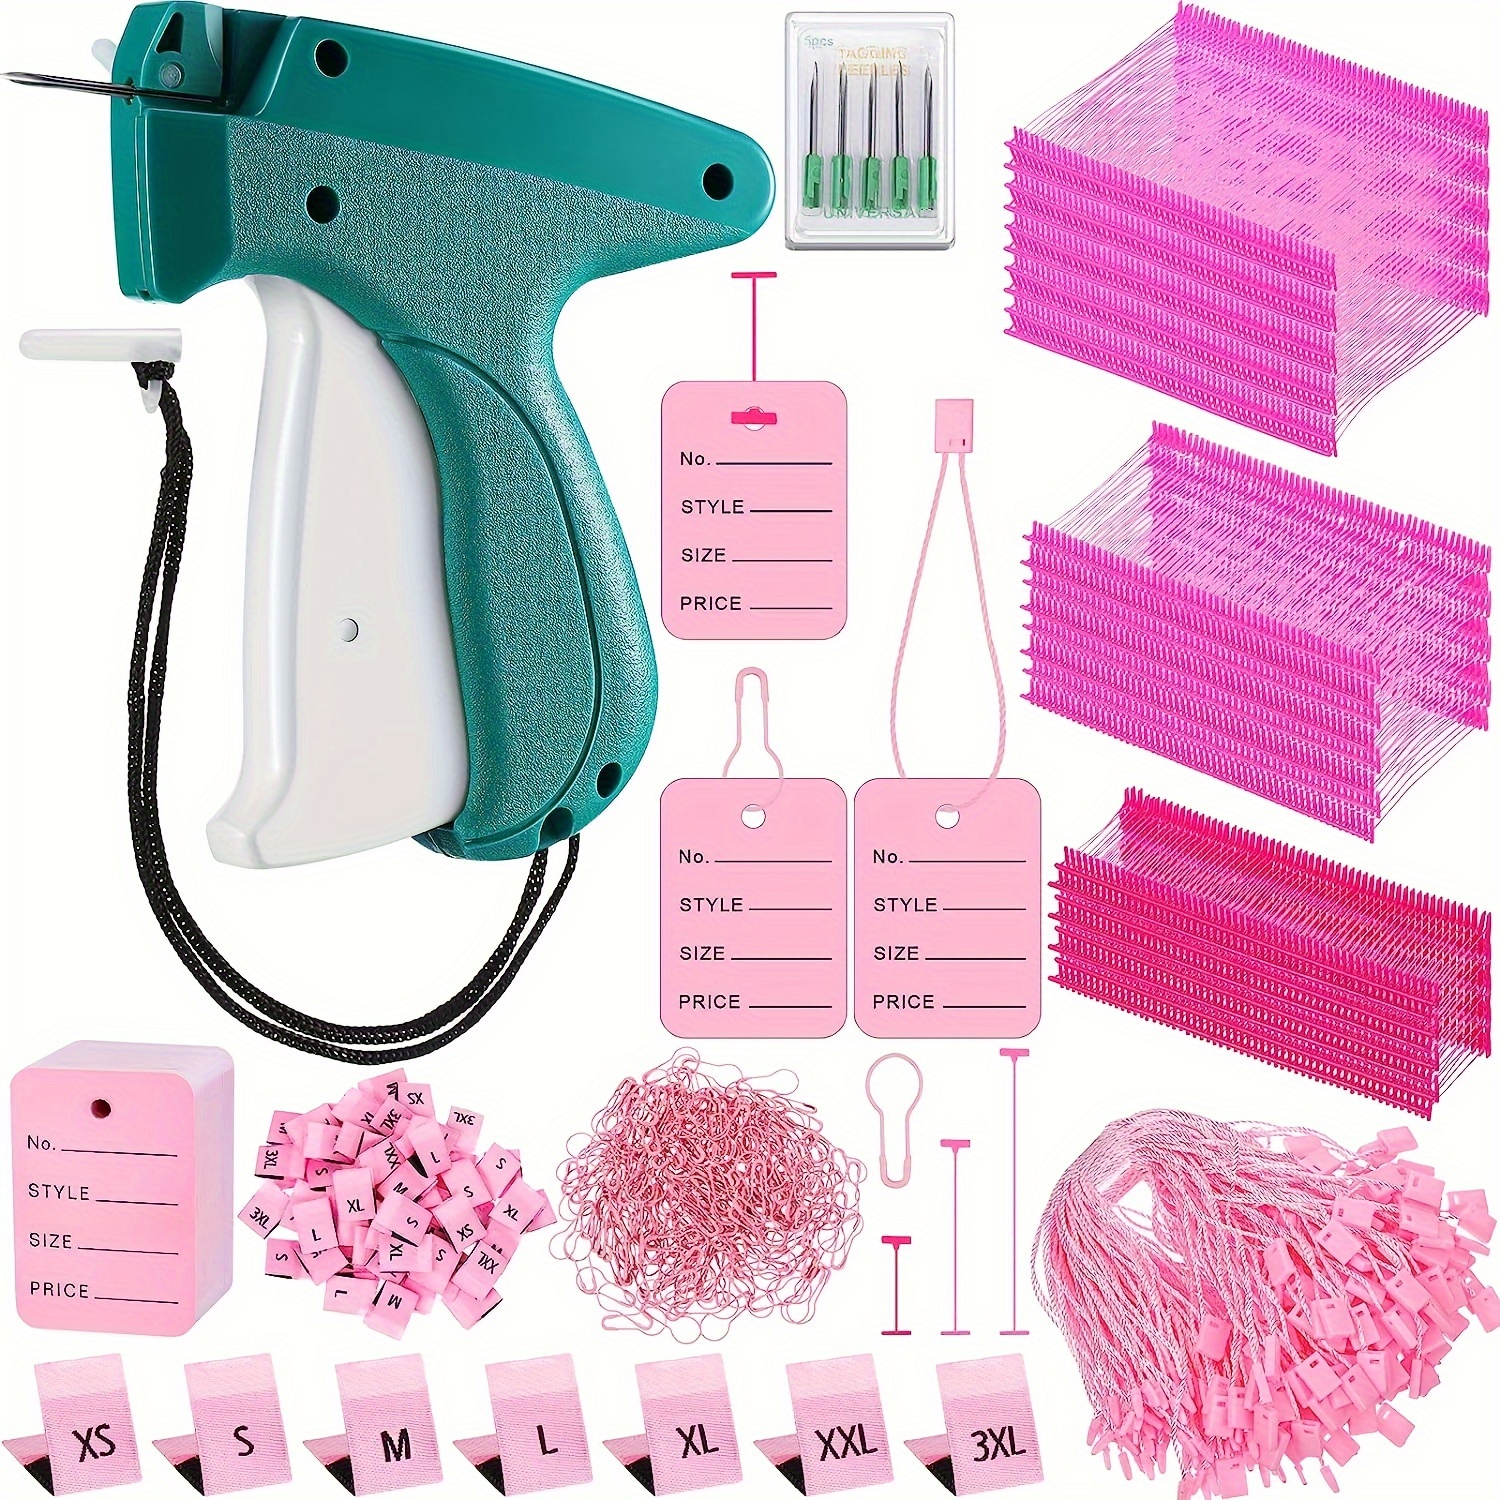 Tagging Gun For Clothing, Standard Retail Price Tag Attacher Gun Kit For  Clothes Labeler With 5 Needles & 1000pcs 5.08cm Barbs Fasteners, Quick  Single